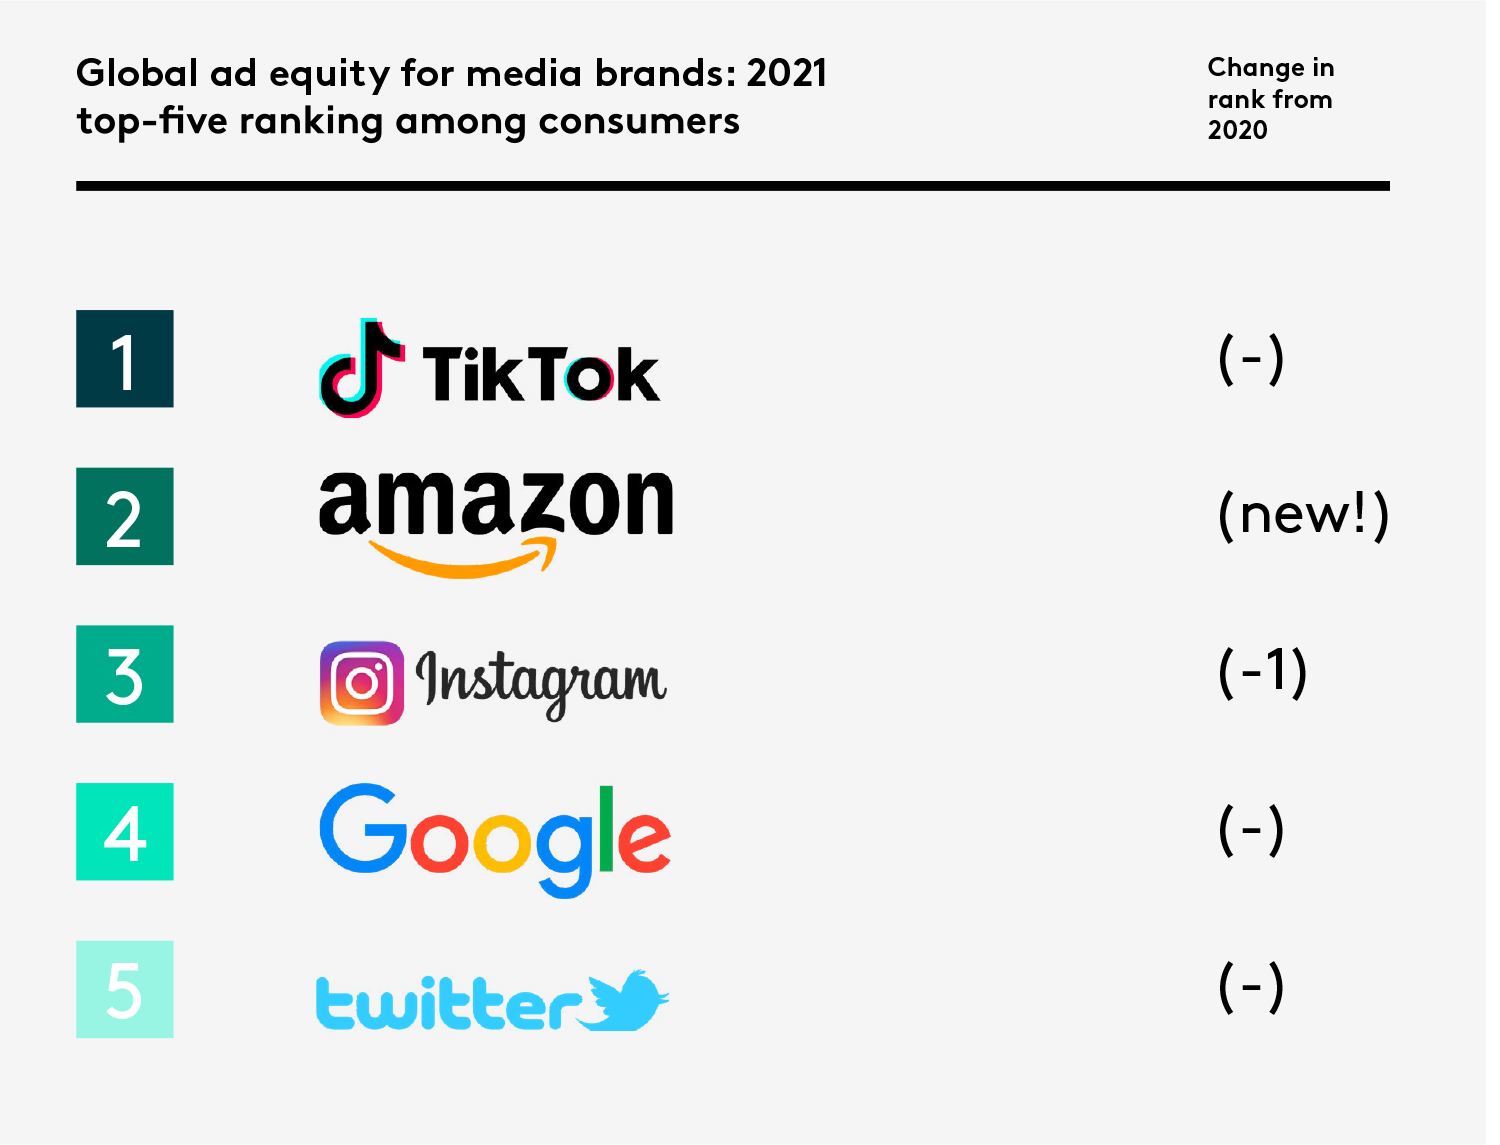 Global ad equity for media brands: 2021 top-five ranking among consumers